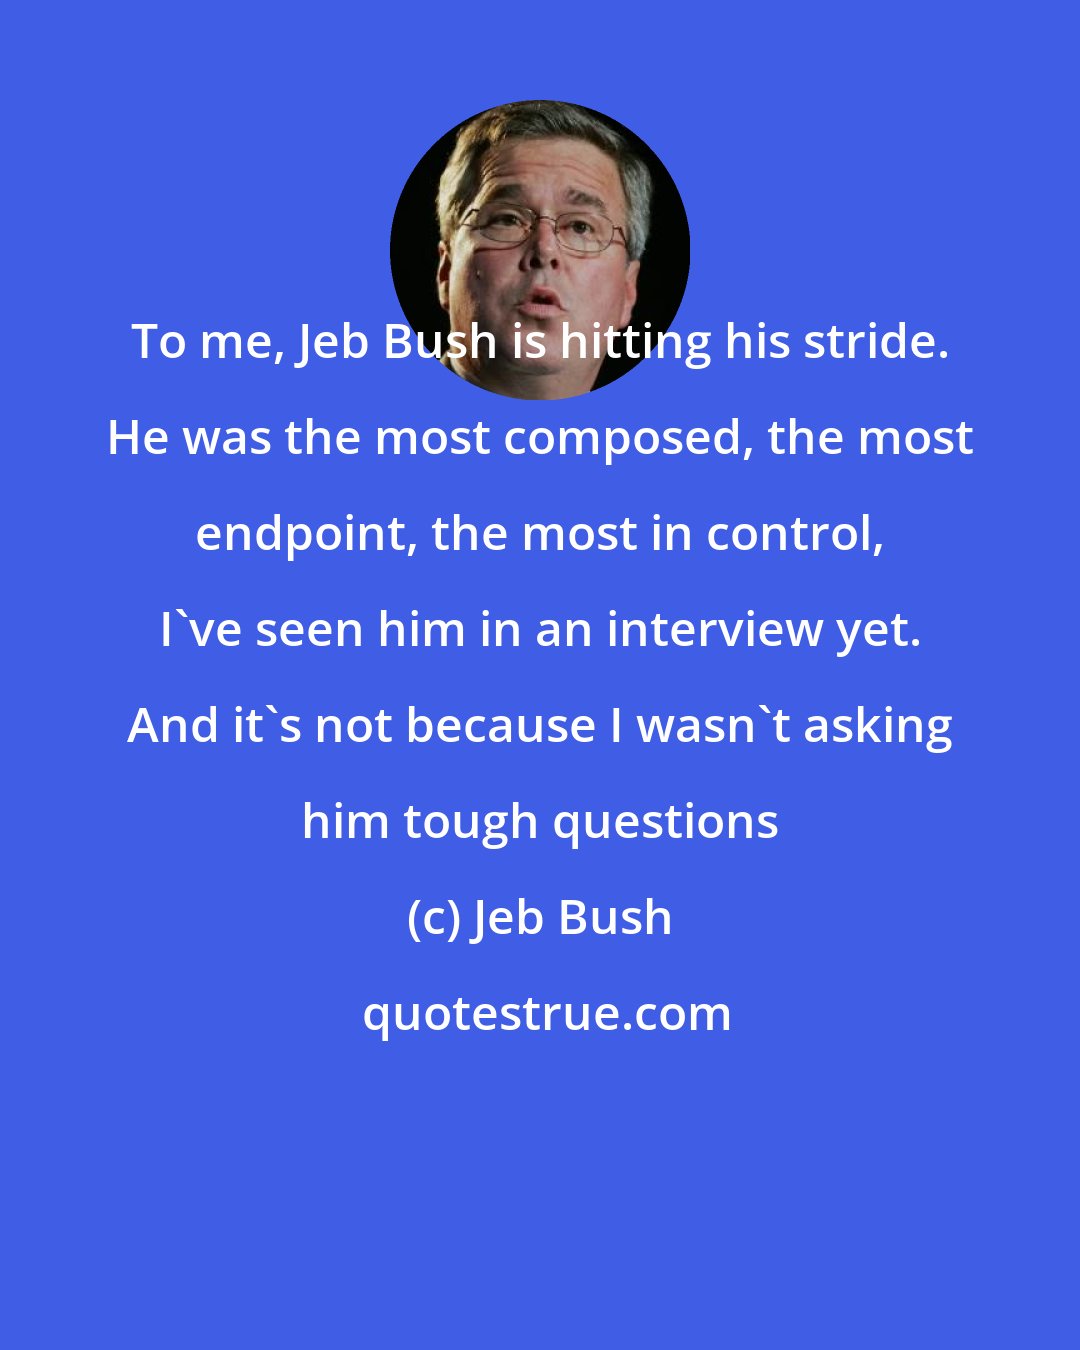 Jeb Bush: To me, Jeb Bush is hitting his stride. He was the most composed, the most endpoint, the most in control, I've seen him in an interview yet. And it's not because I wasn't asking him tough questions